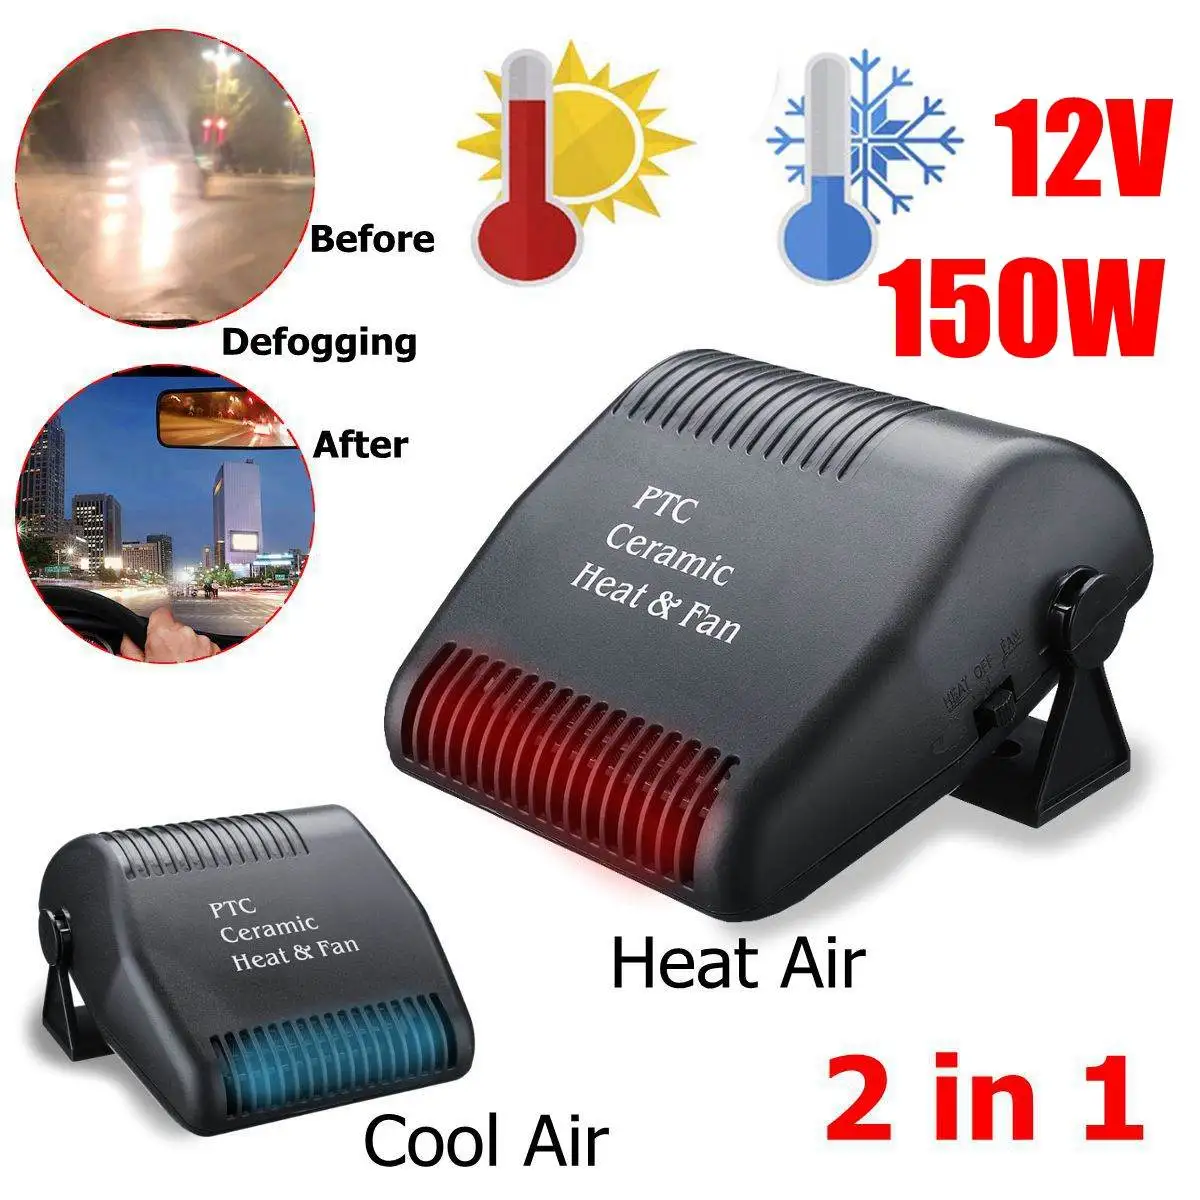 12V Car Heater 300W Car Glass Defroster Window Heater for Winter Auto Air Outlet Warm Dryer in Auto Goods Interior Accessories